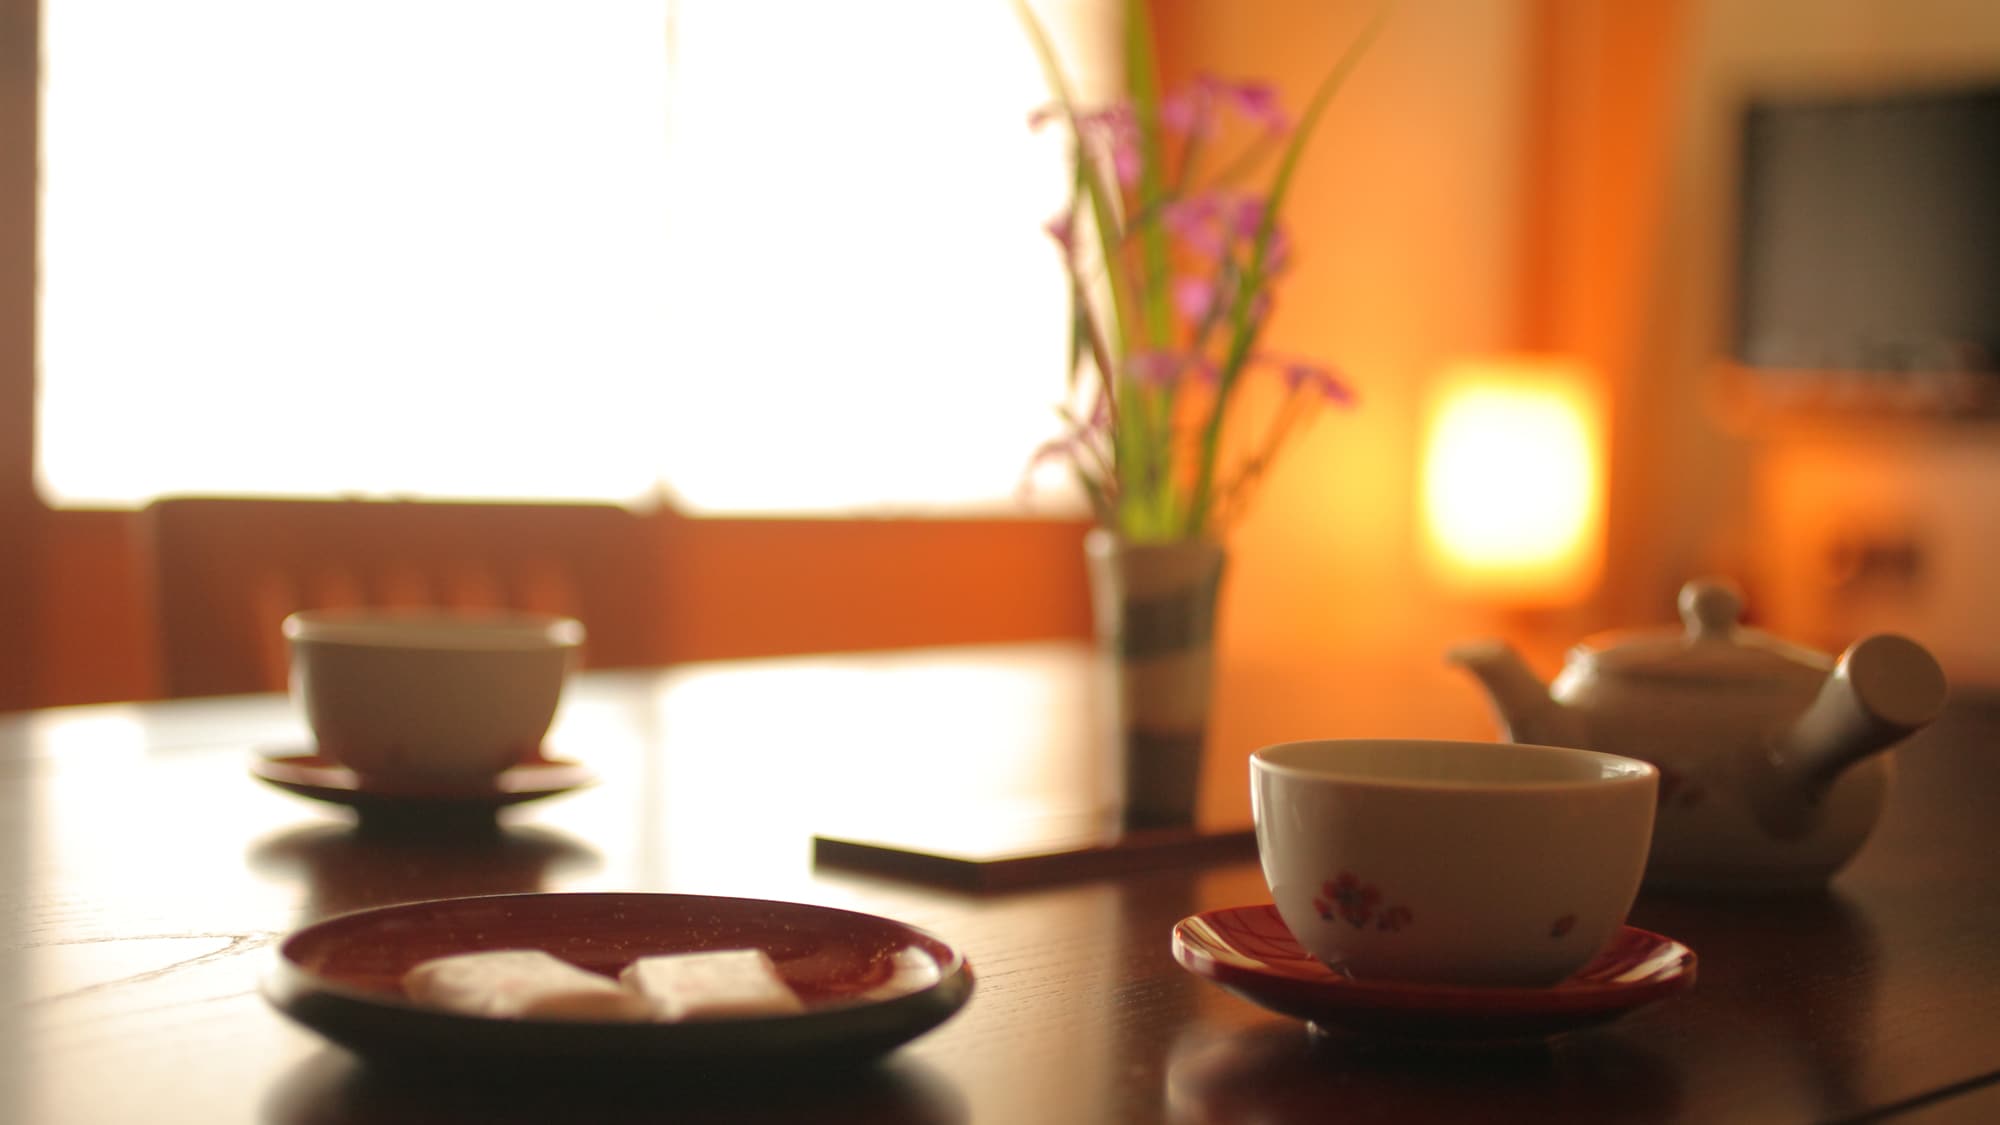 First, take a break in your room. We will entertain you with delicious tea.